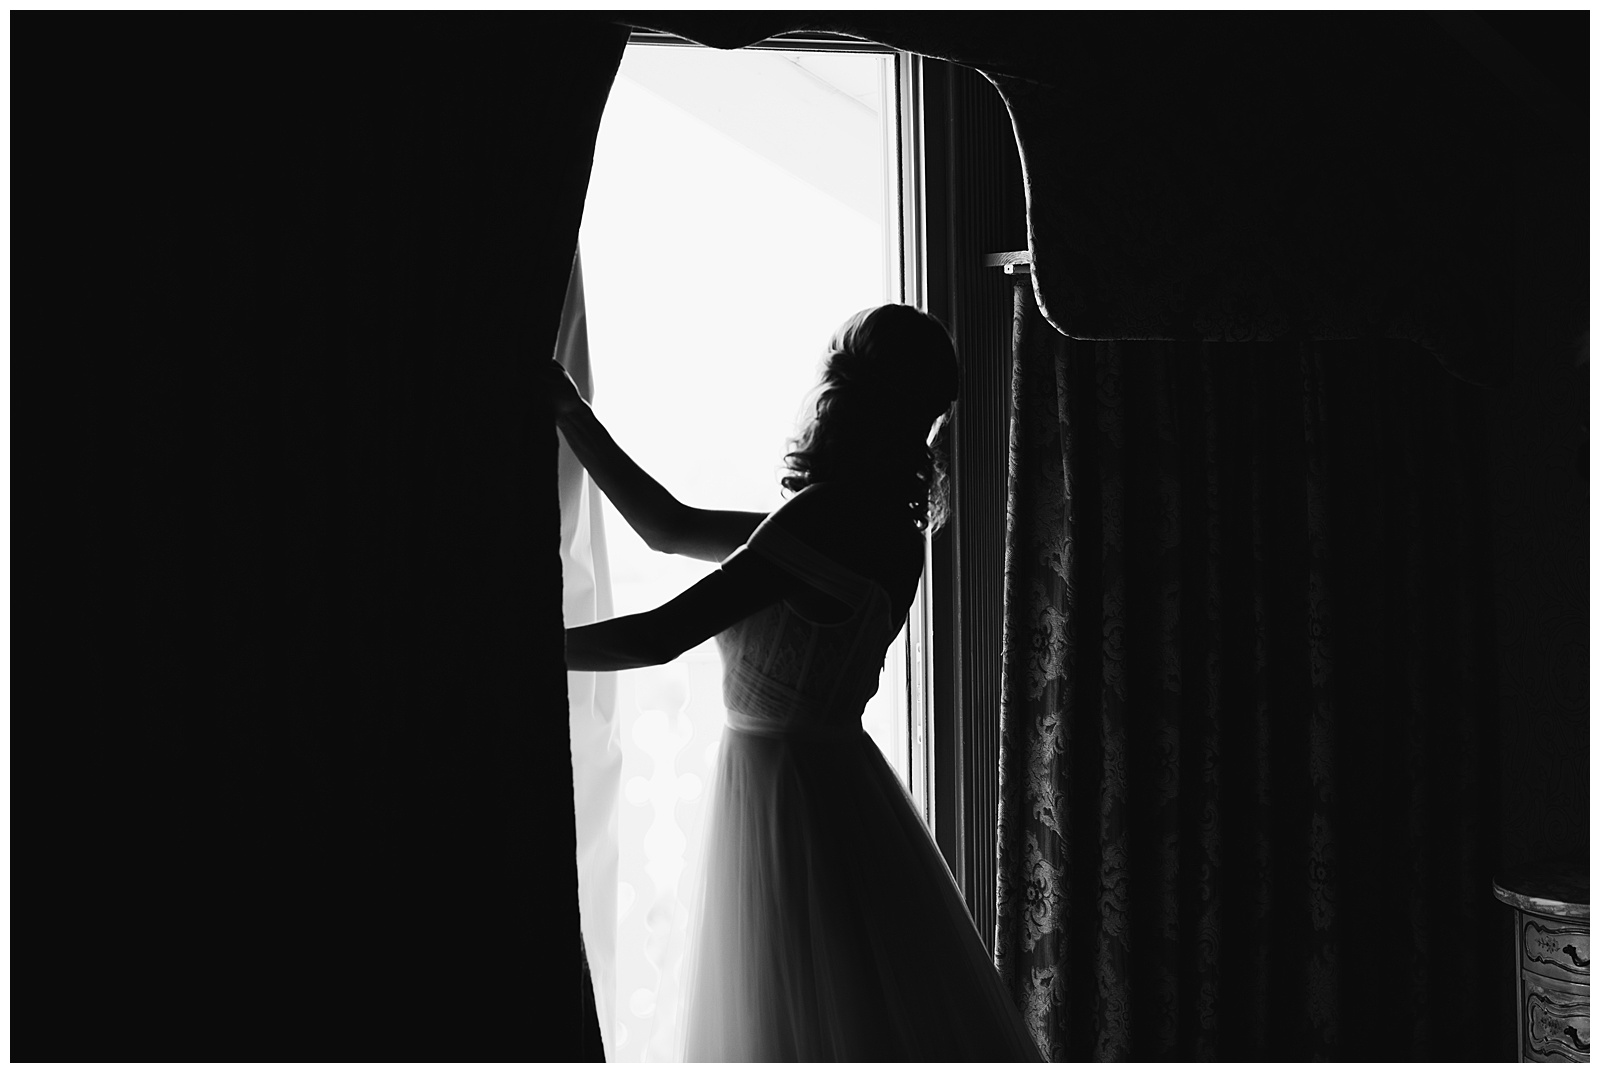 The bride opening the window to see her groom for the first time on a balcony